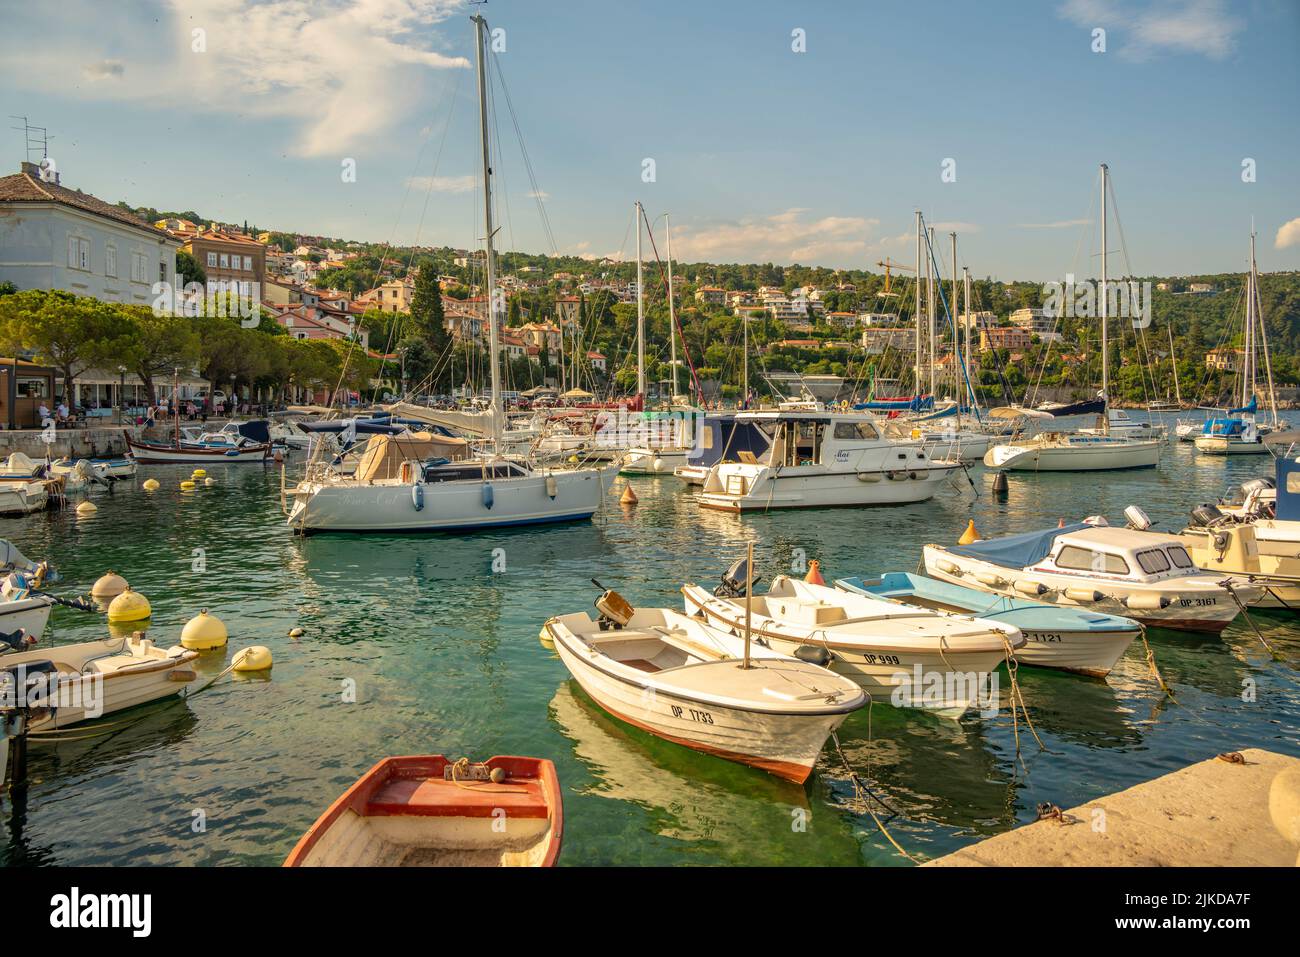 View of boats in the marina and harbourside restaurants during golden hour in Volosko, Opatija, Croatia, Europe Stock Photo